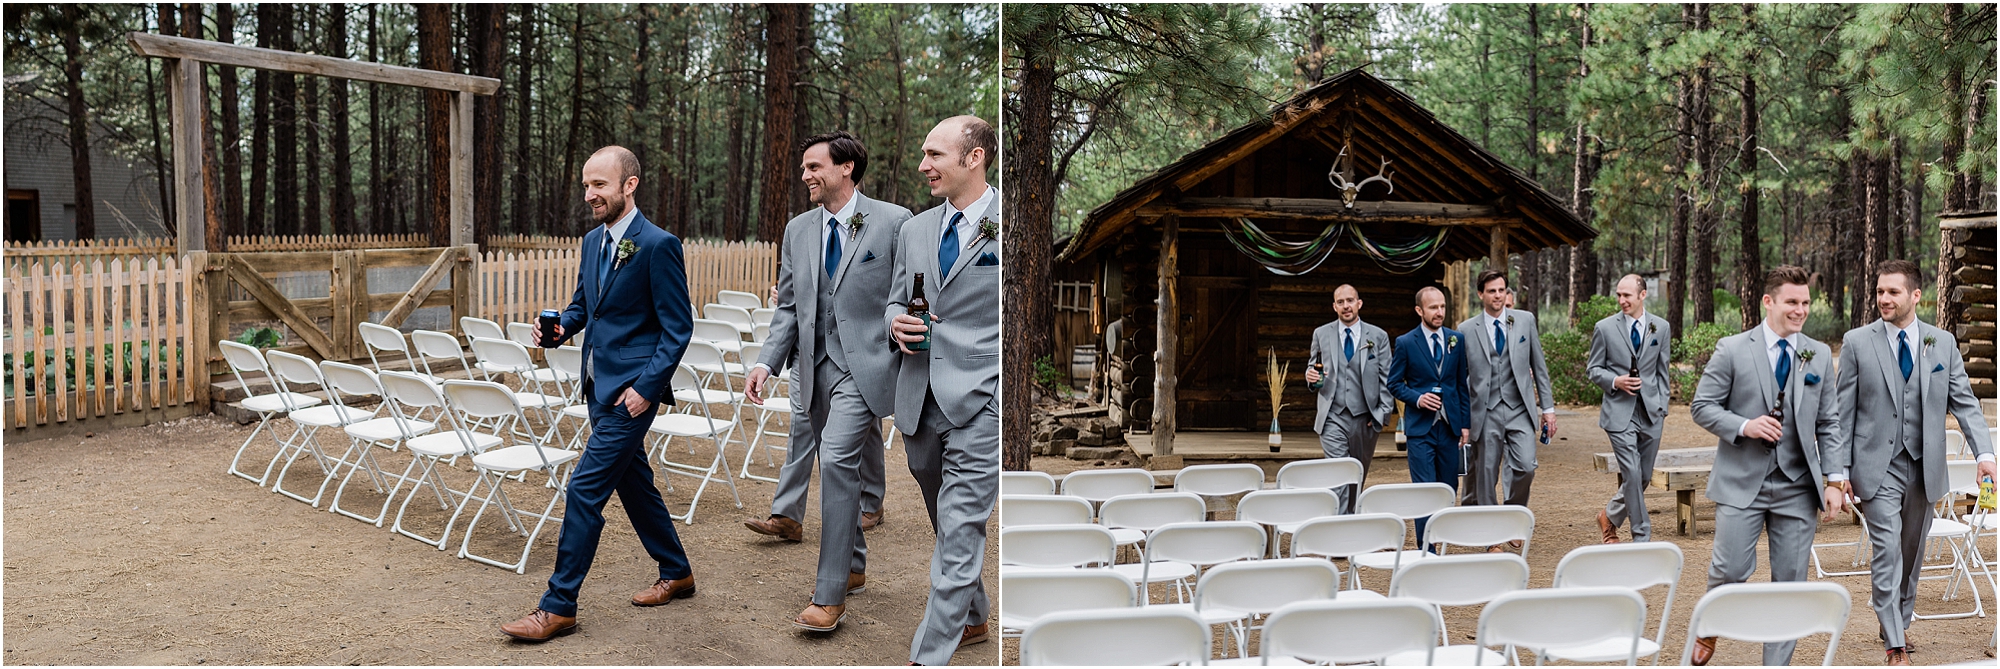 The groom and groomsman walk into the ceremony location drinking some beers and ready for the day. | Erica Swantek Photography